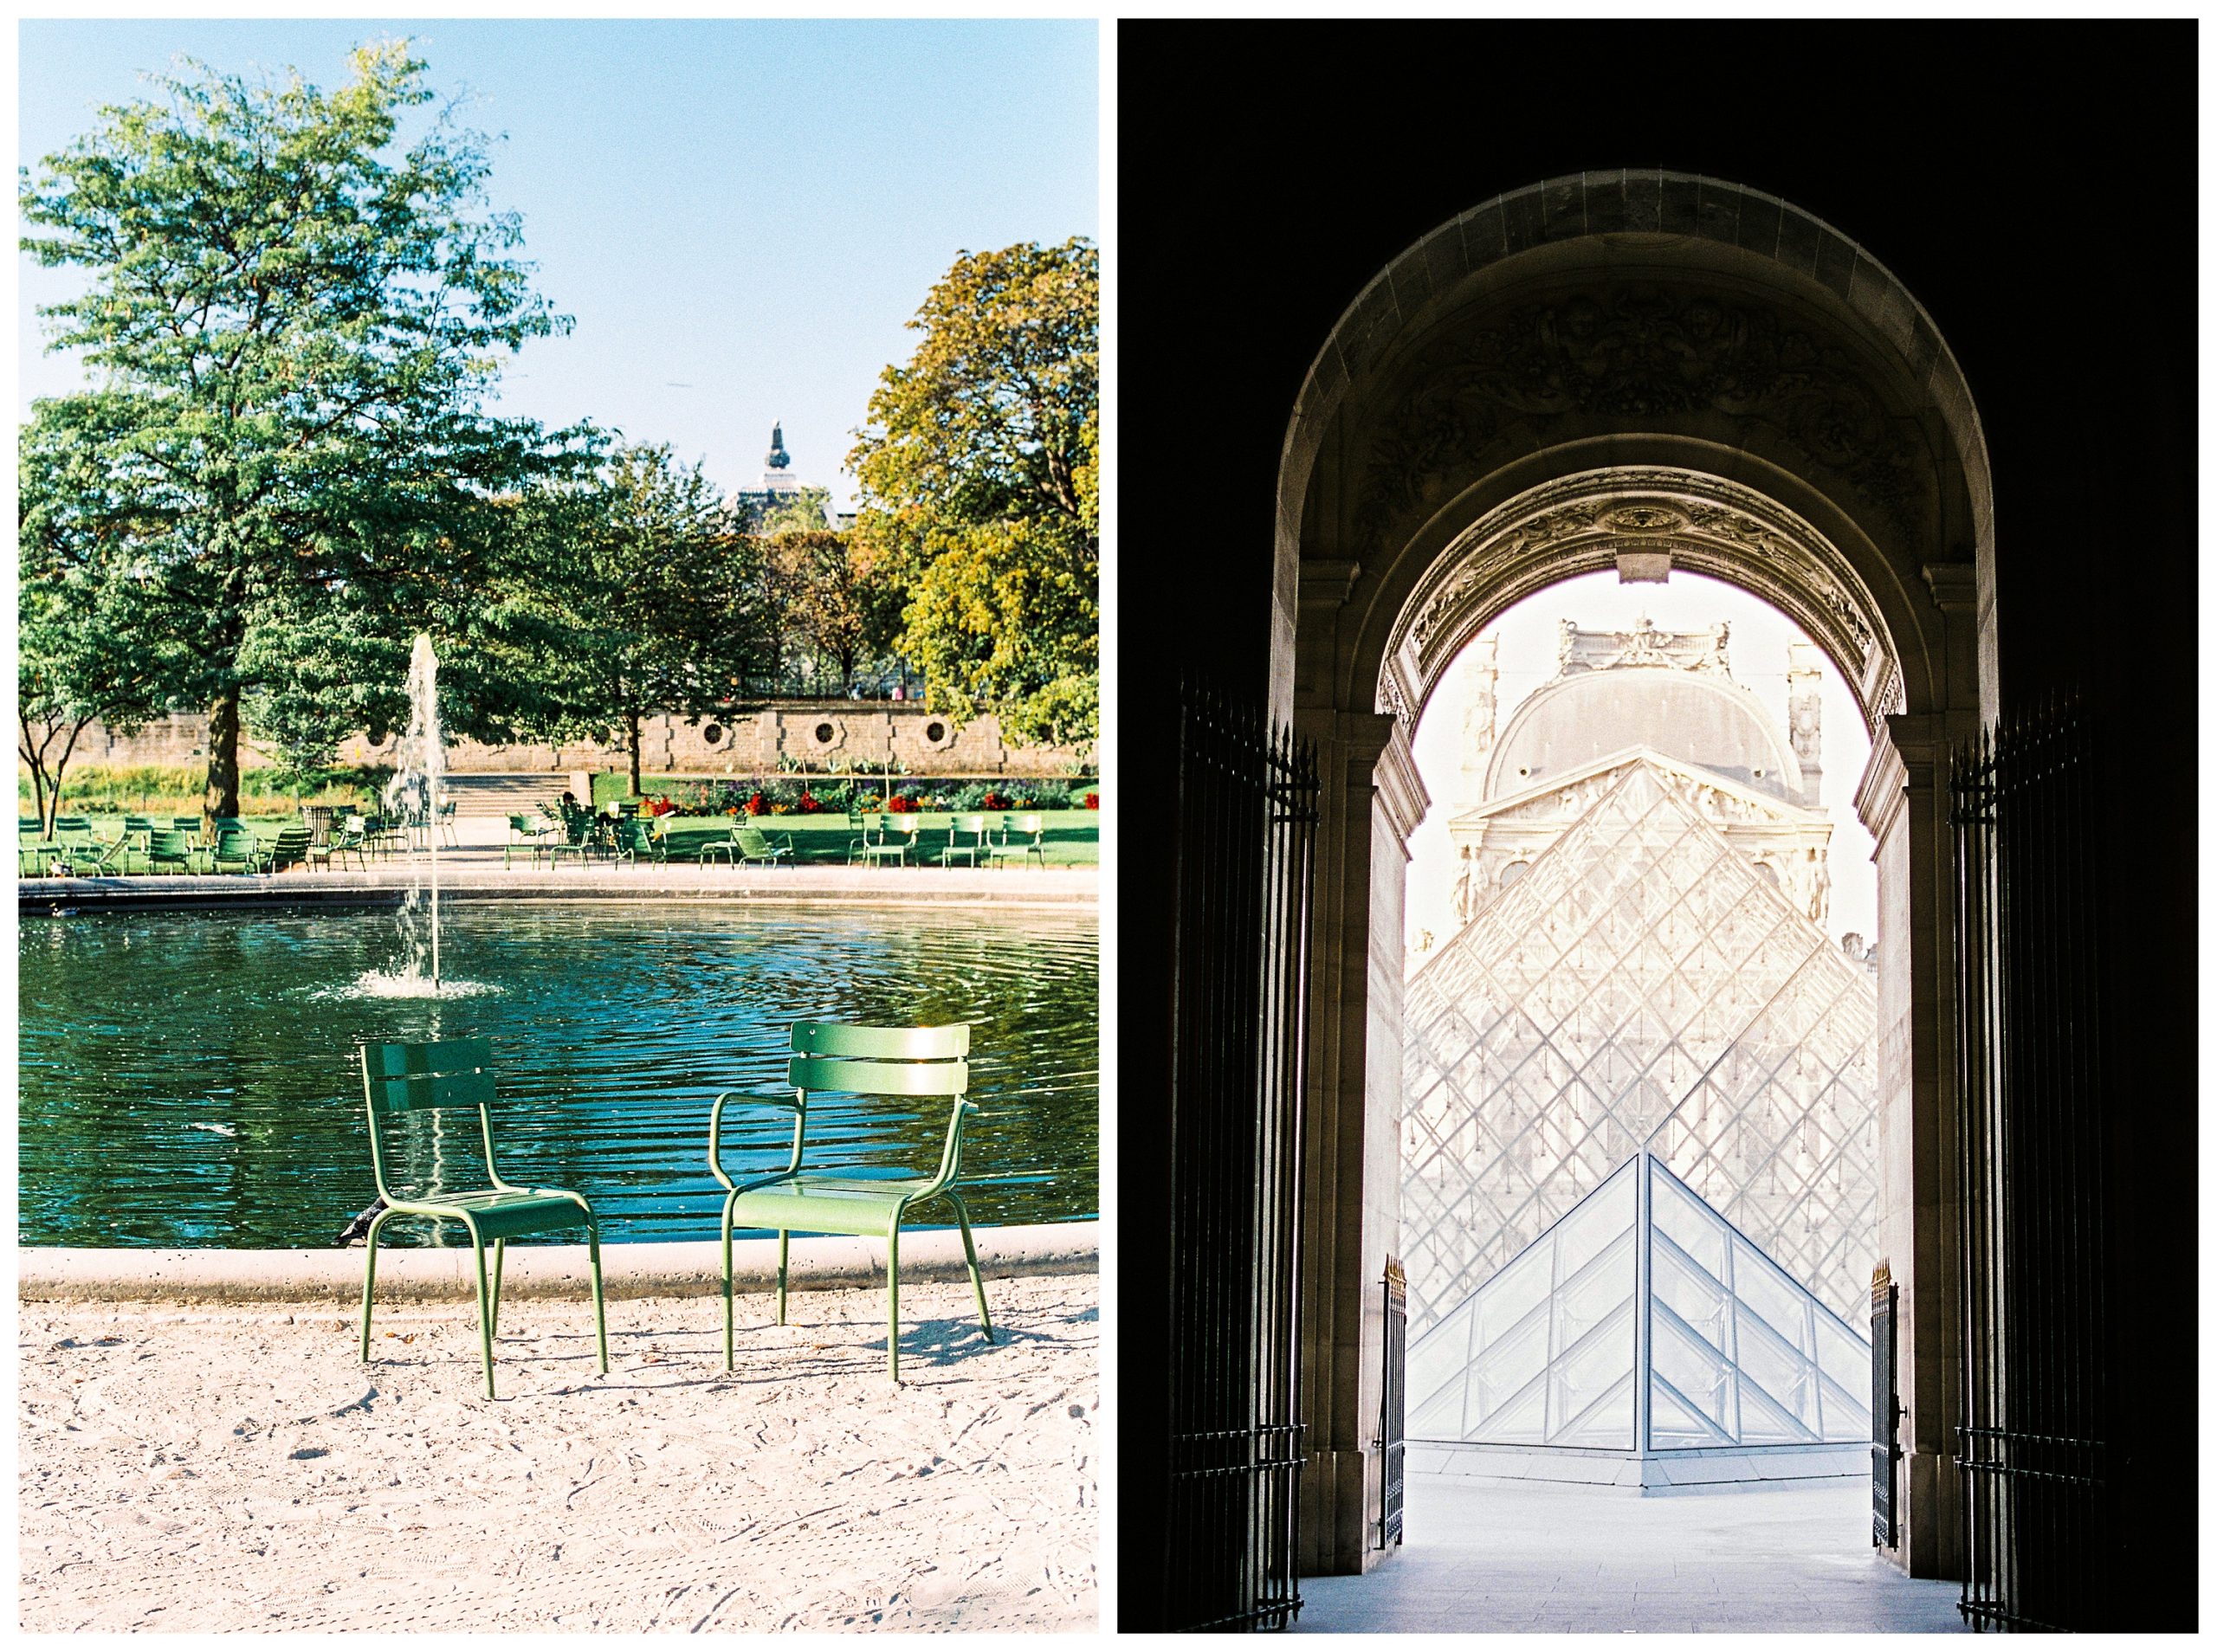 On the left: full sun on a September morning in the Jardin des Tuileries, with two empty chairs sitting beside the splashing fountain. On the right: The majestic archway of the Louvre frames a view of the glass pyramid. 